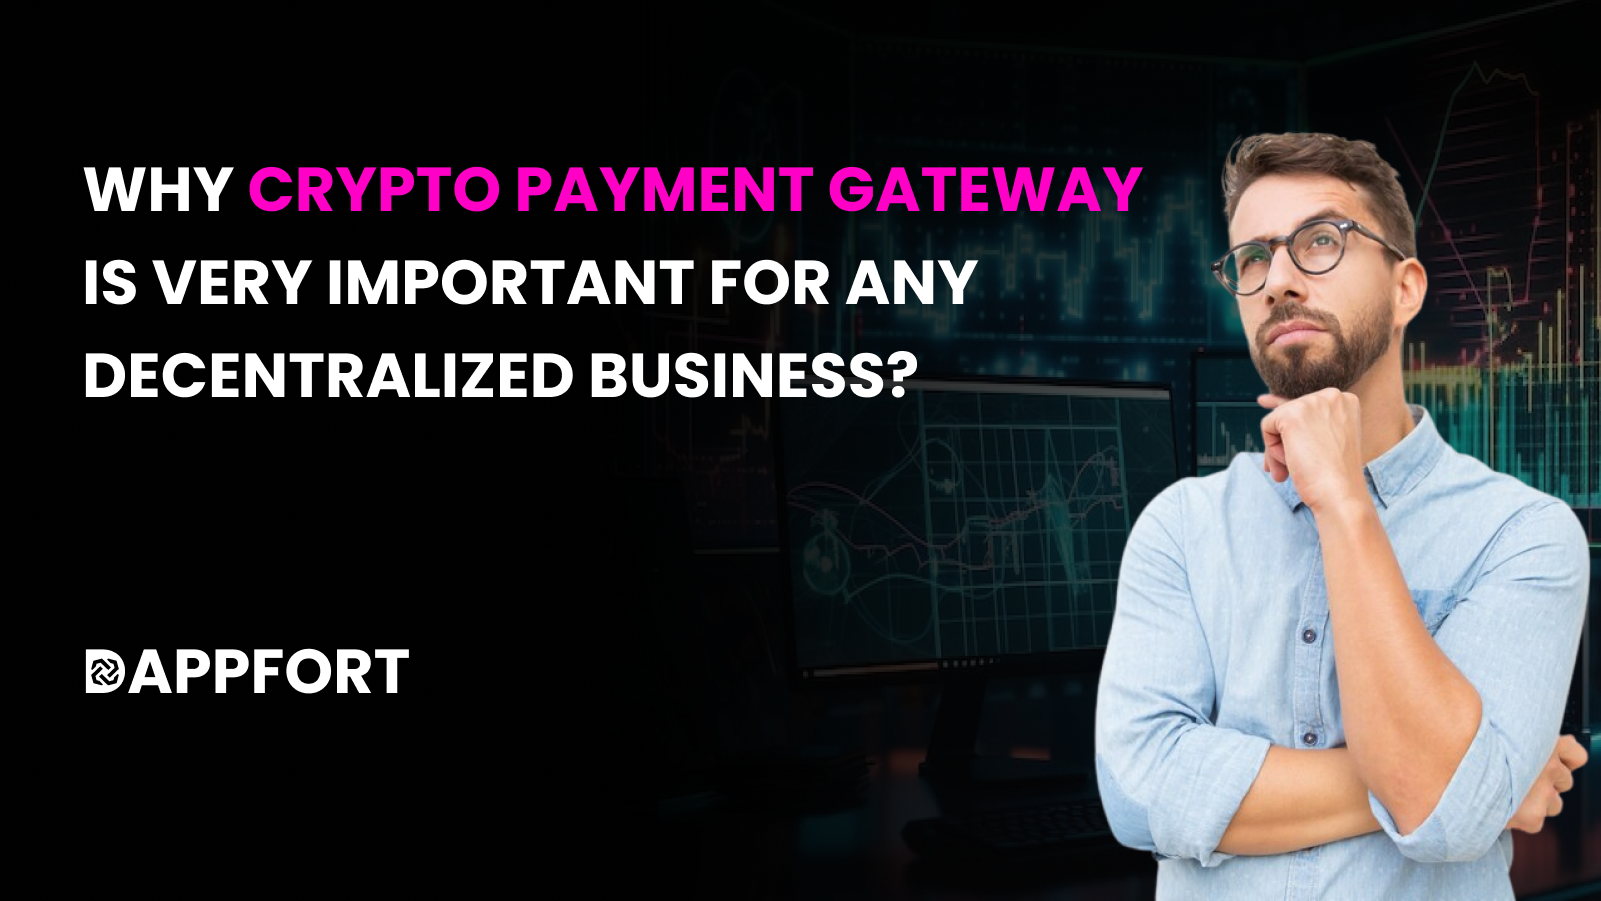 Why crypto payment gateway is very important for any decentralized business?